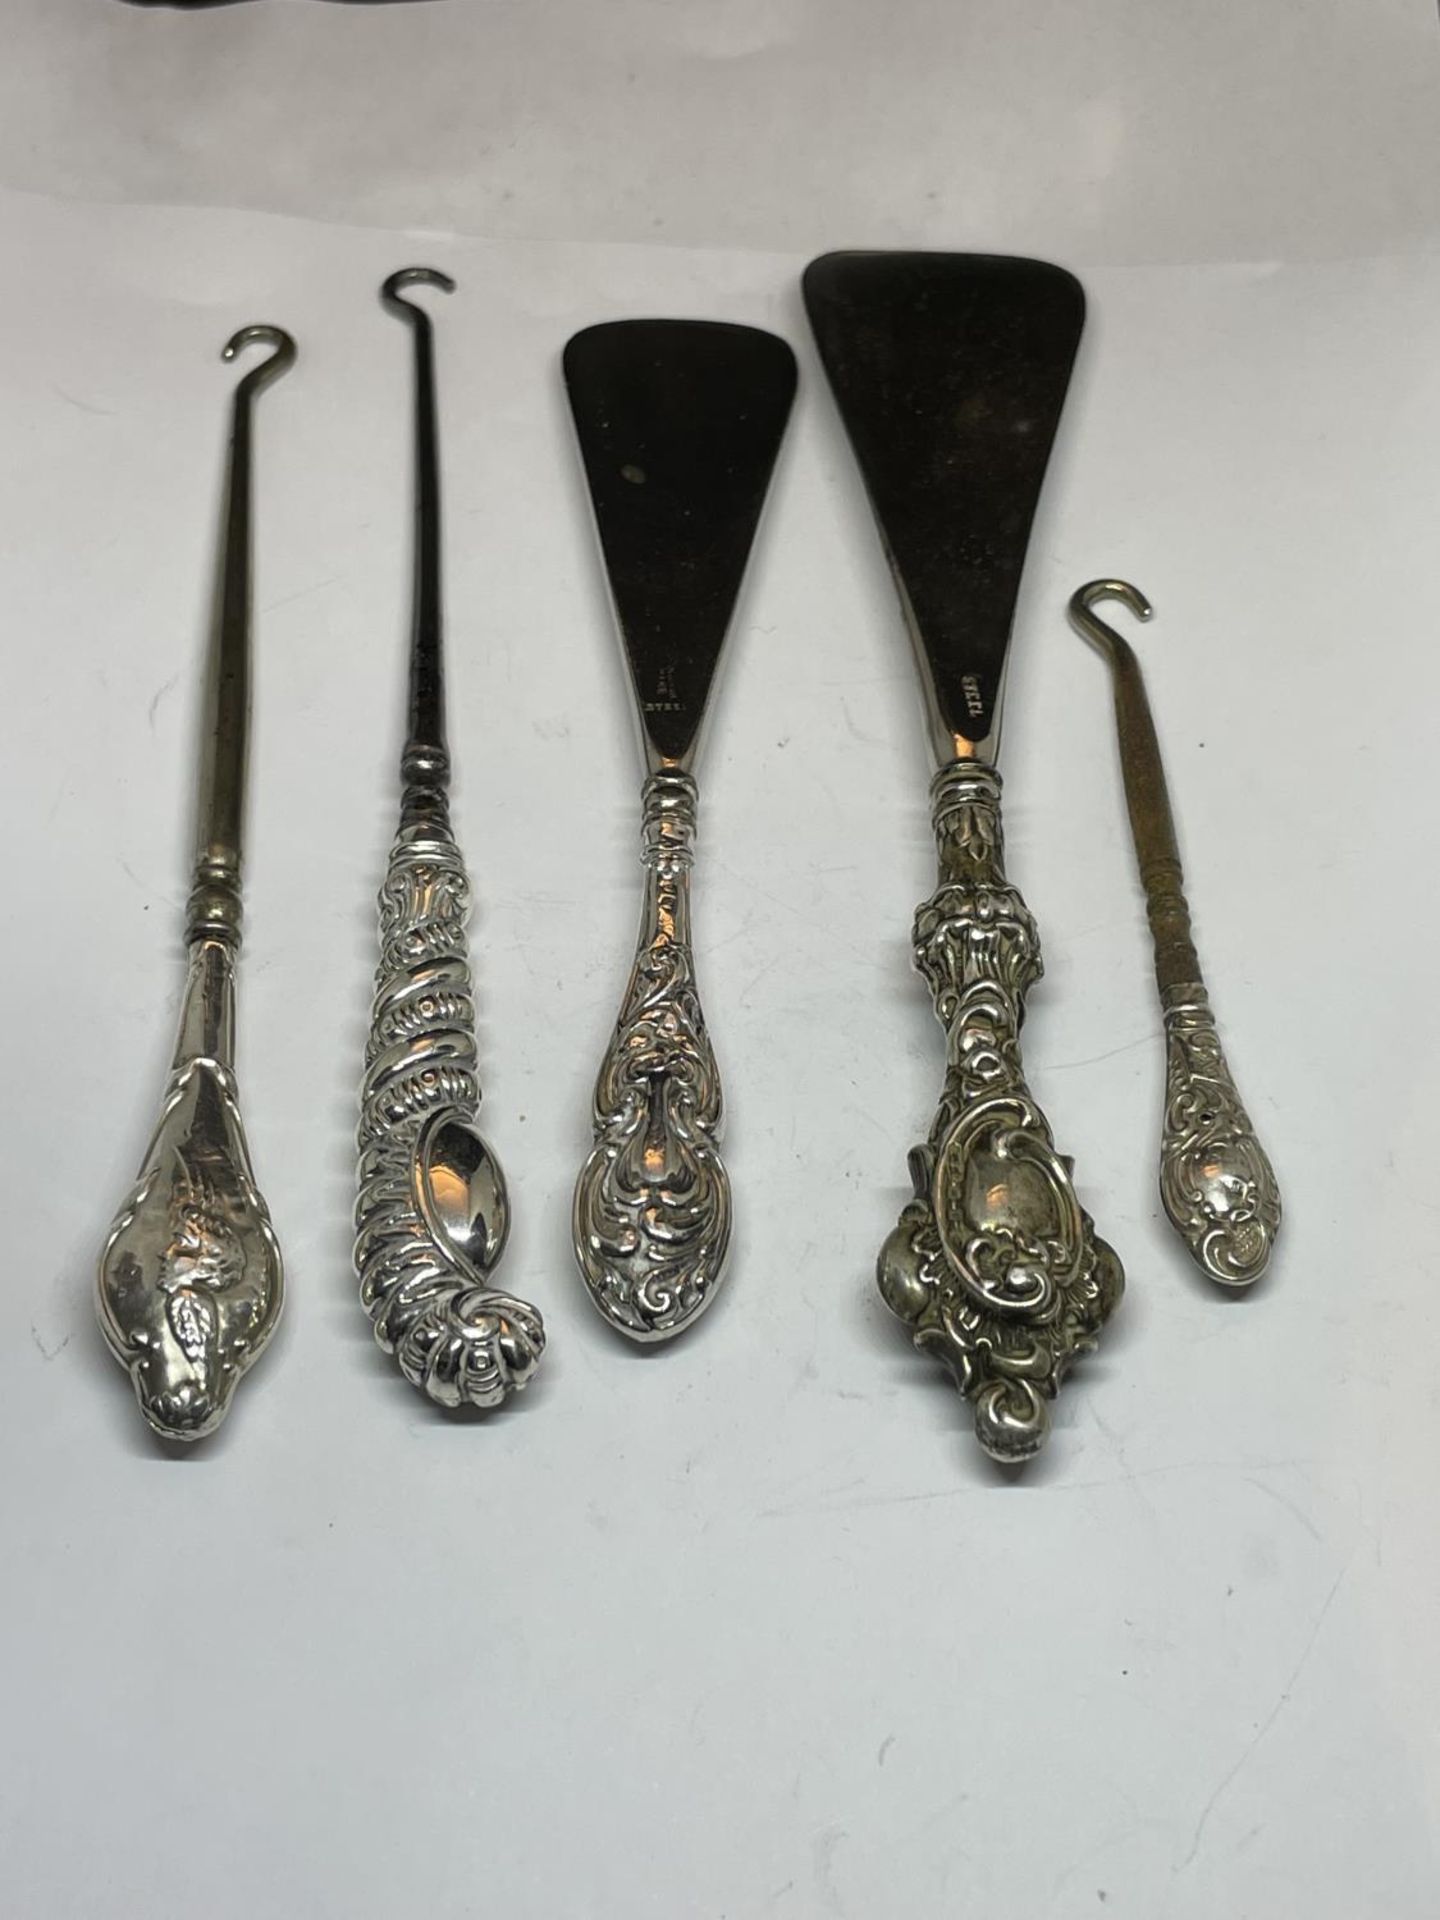 FIVE HALLMARKED SILVER HANDLED ITEMS TO INCLUDE BUTTON HOOKS AND SHOE HORNS